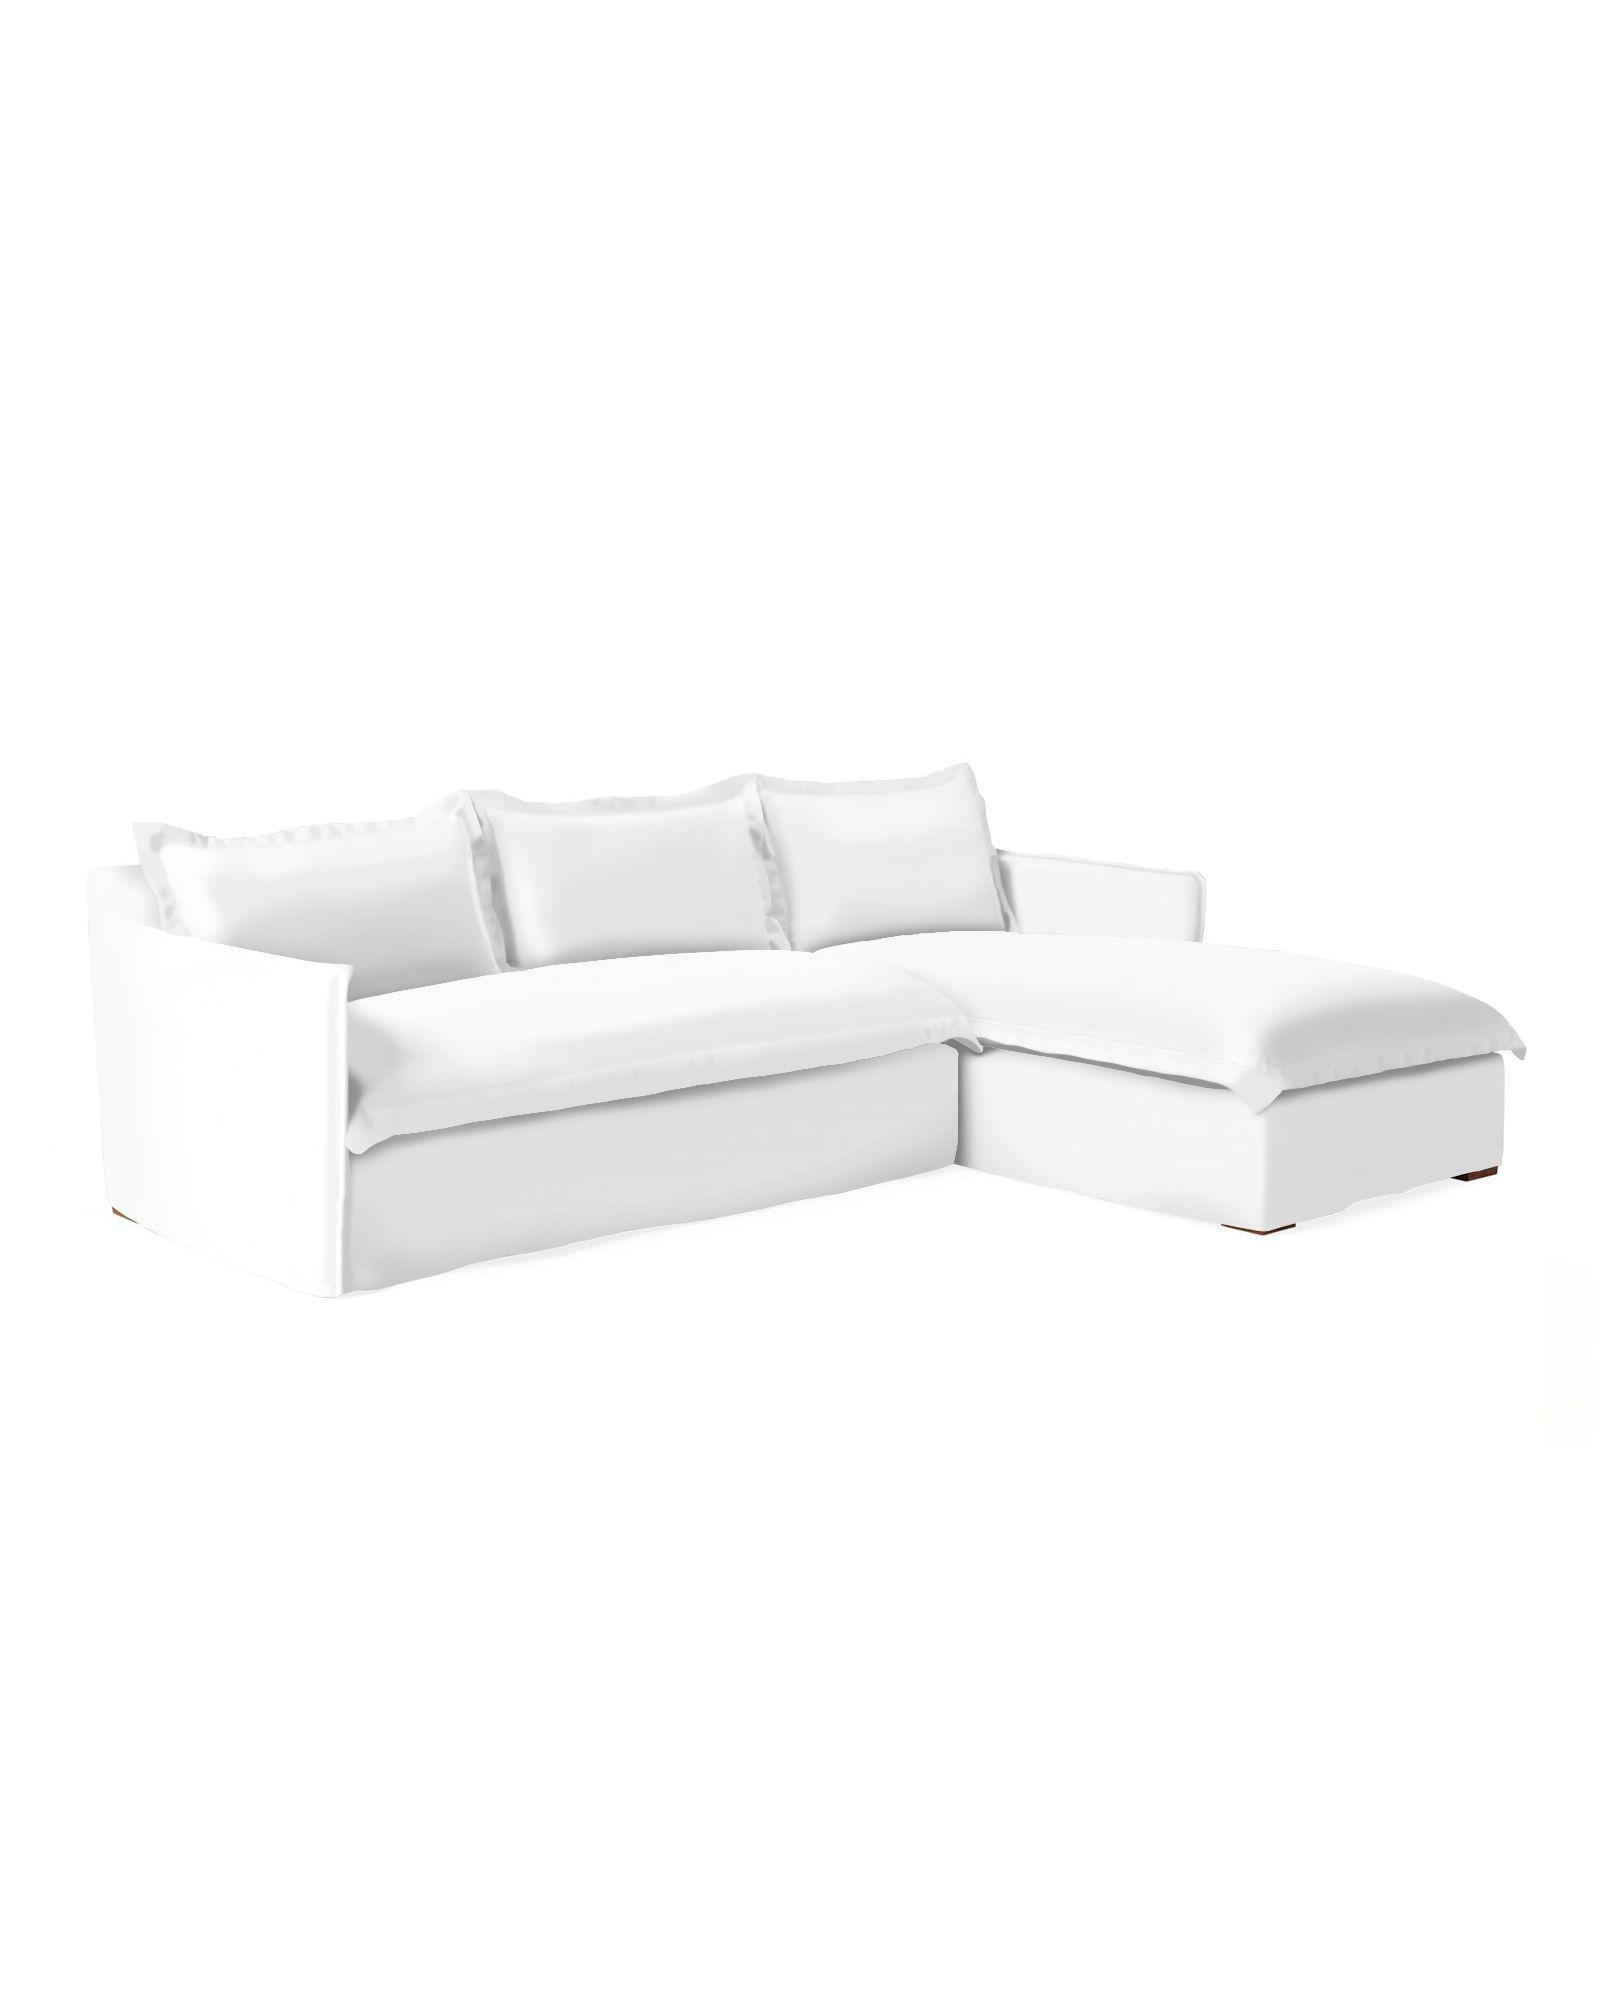 Beach House Chaise Sectional - Right-Facing | Serena and Lily